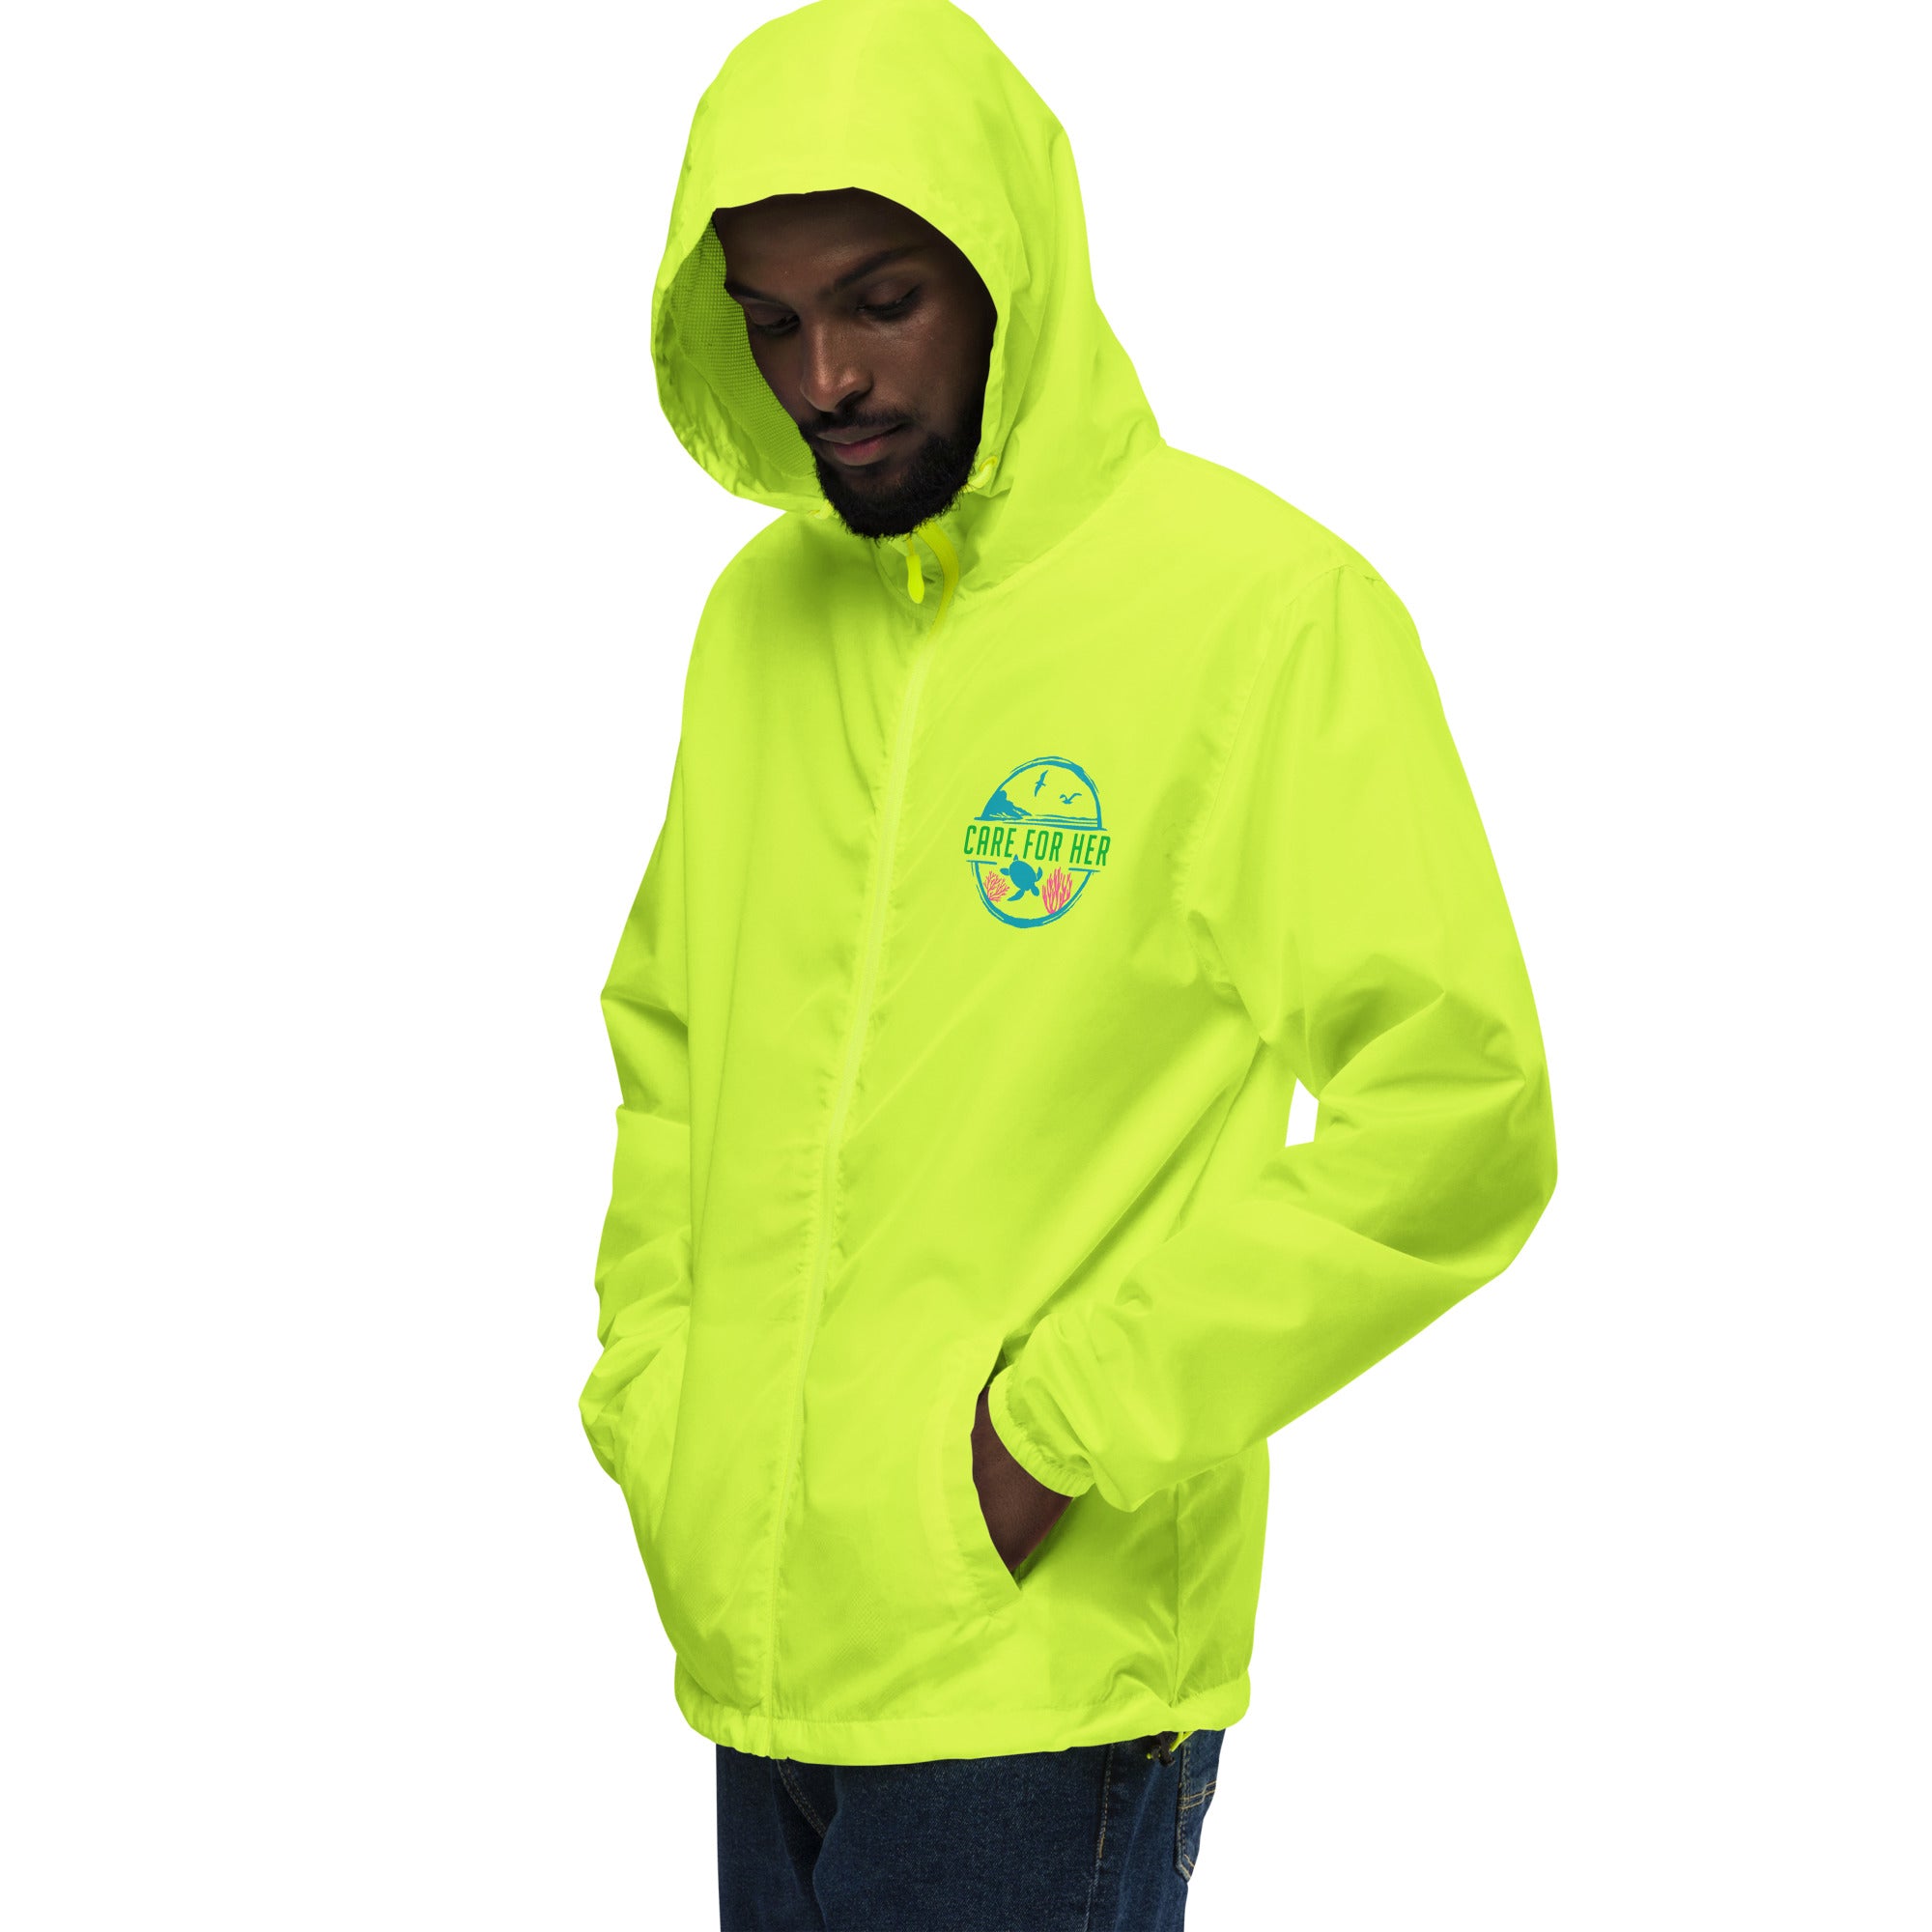 Care for Planet Earth Against Climate Change Unisex Lightweight Zip Up Windbreaker